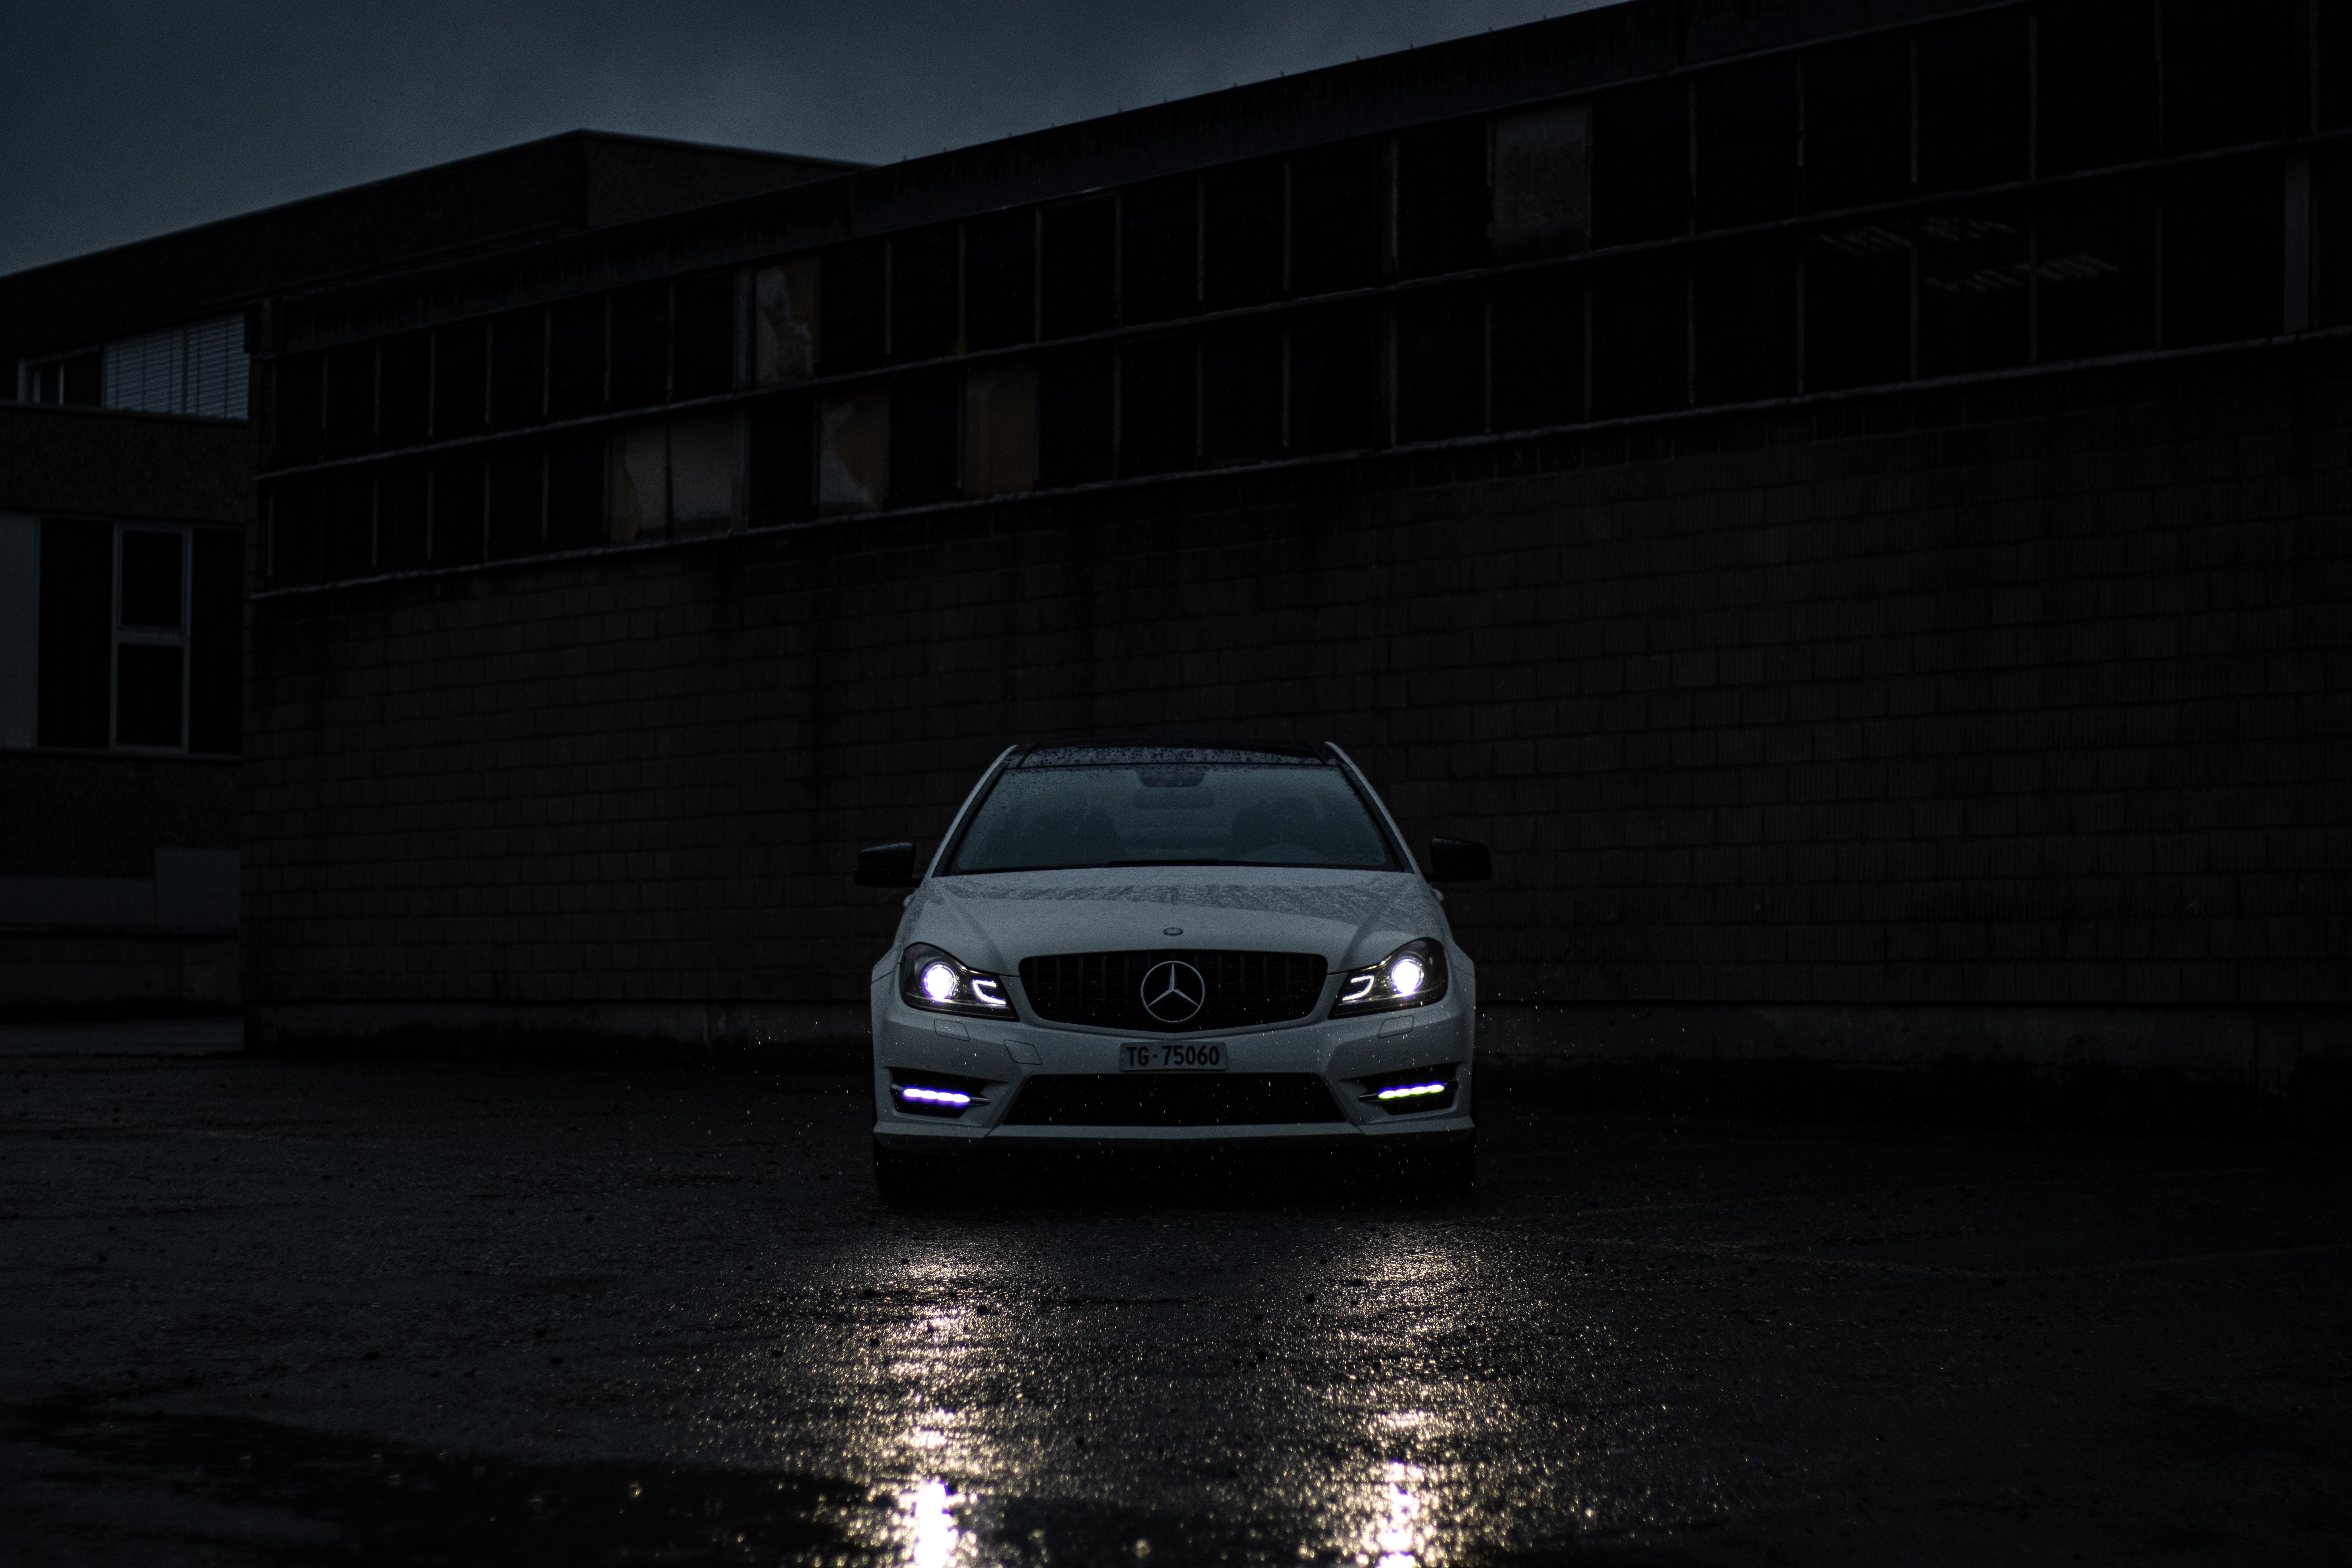 mercedes benz, headlights, cars, white, lights, car, front view